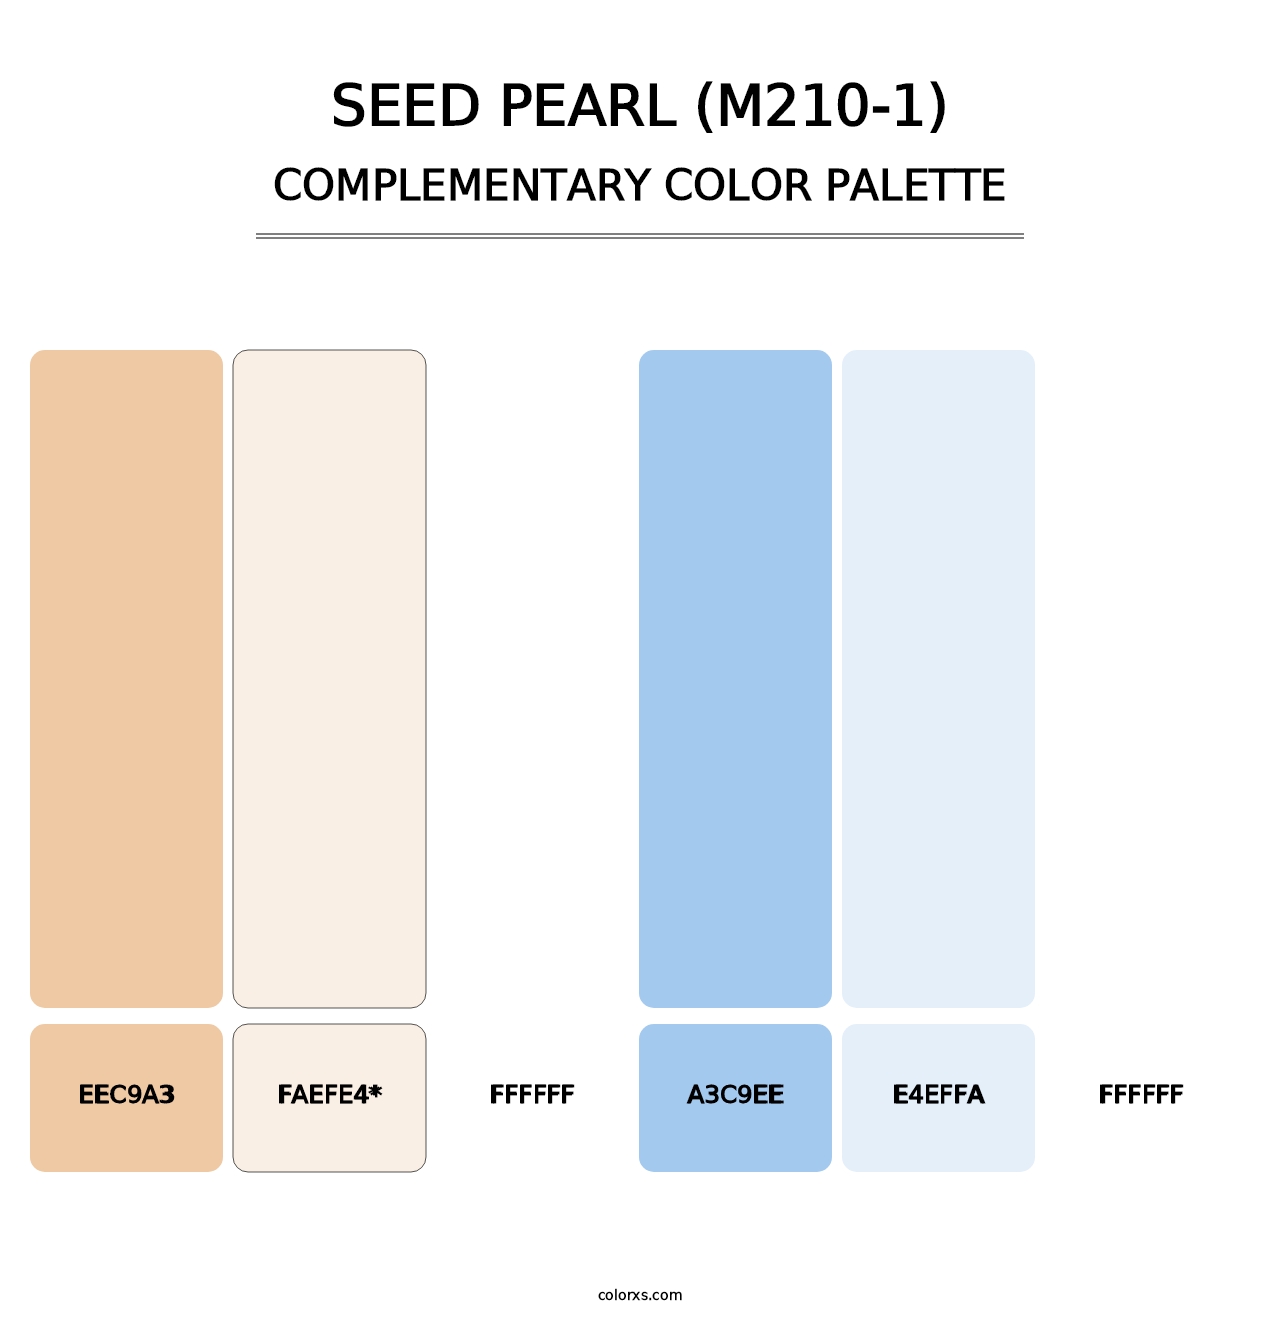 Seed Pearl (M210-1) - Complementary Color Palette